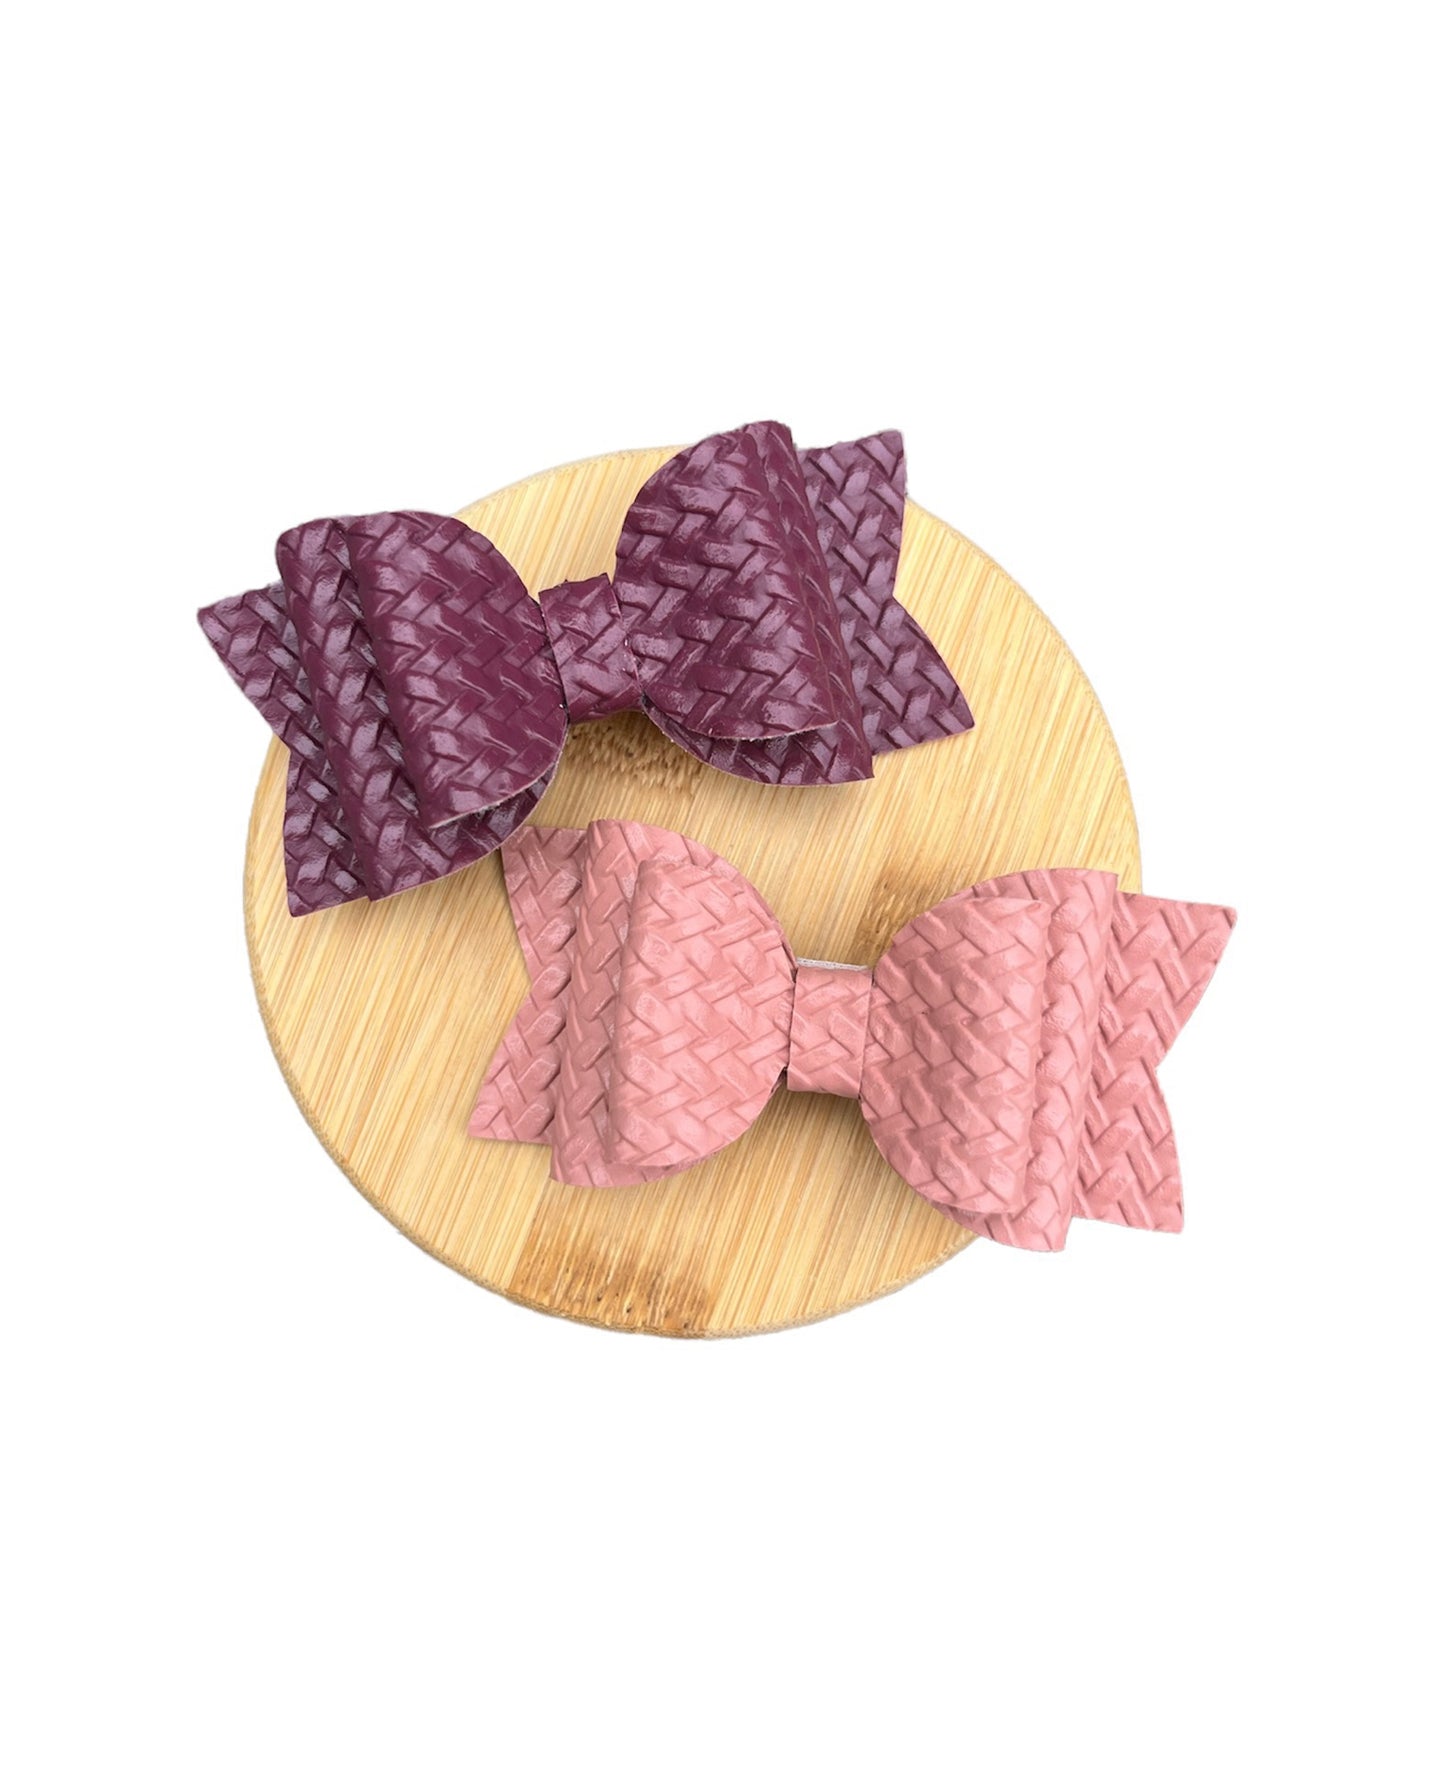 Micro Basket Weave Classic Bows!